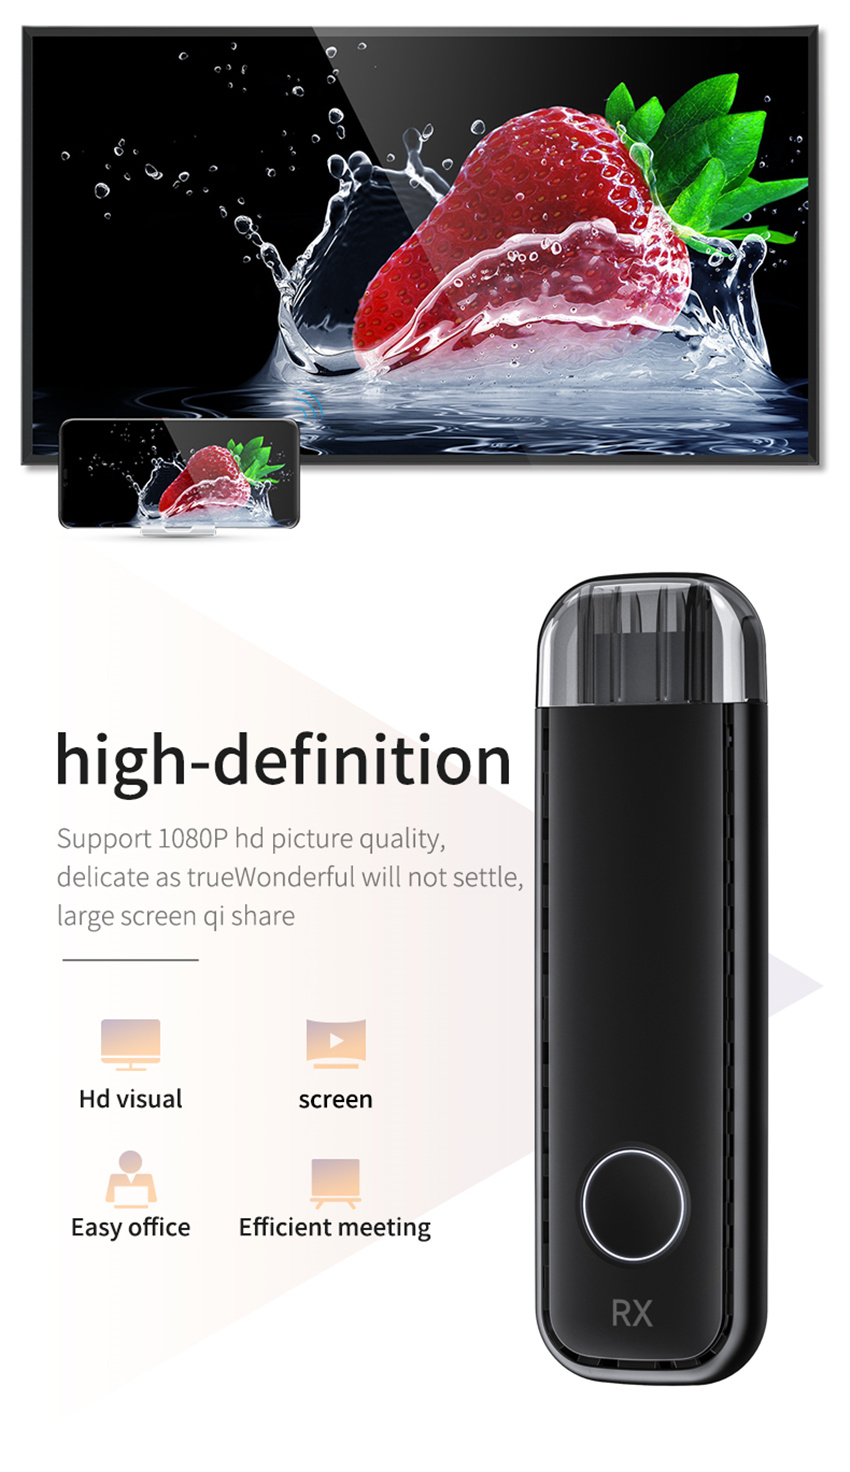 5G 50M Wireless HDMI Video Transmitter And Receiver Kit Adapter Home Audio TV Stick Full HD Projector Extender Display Dongle